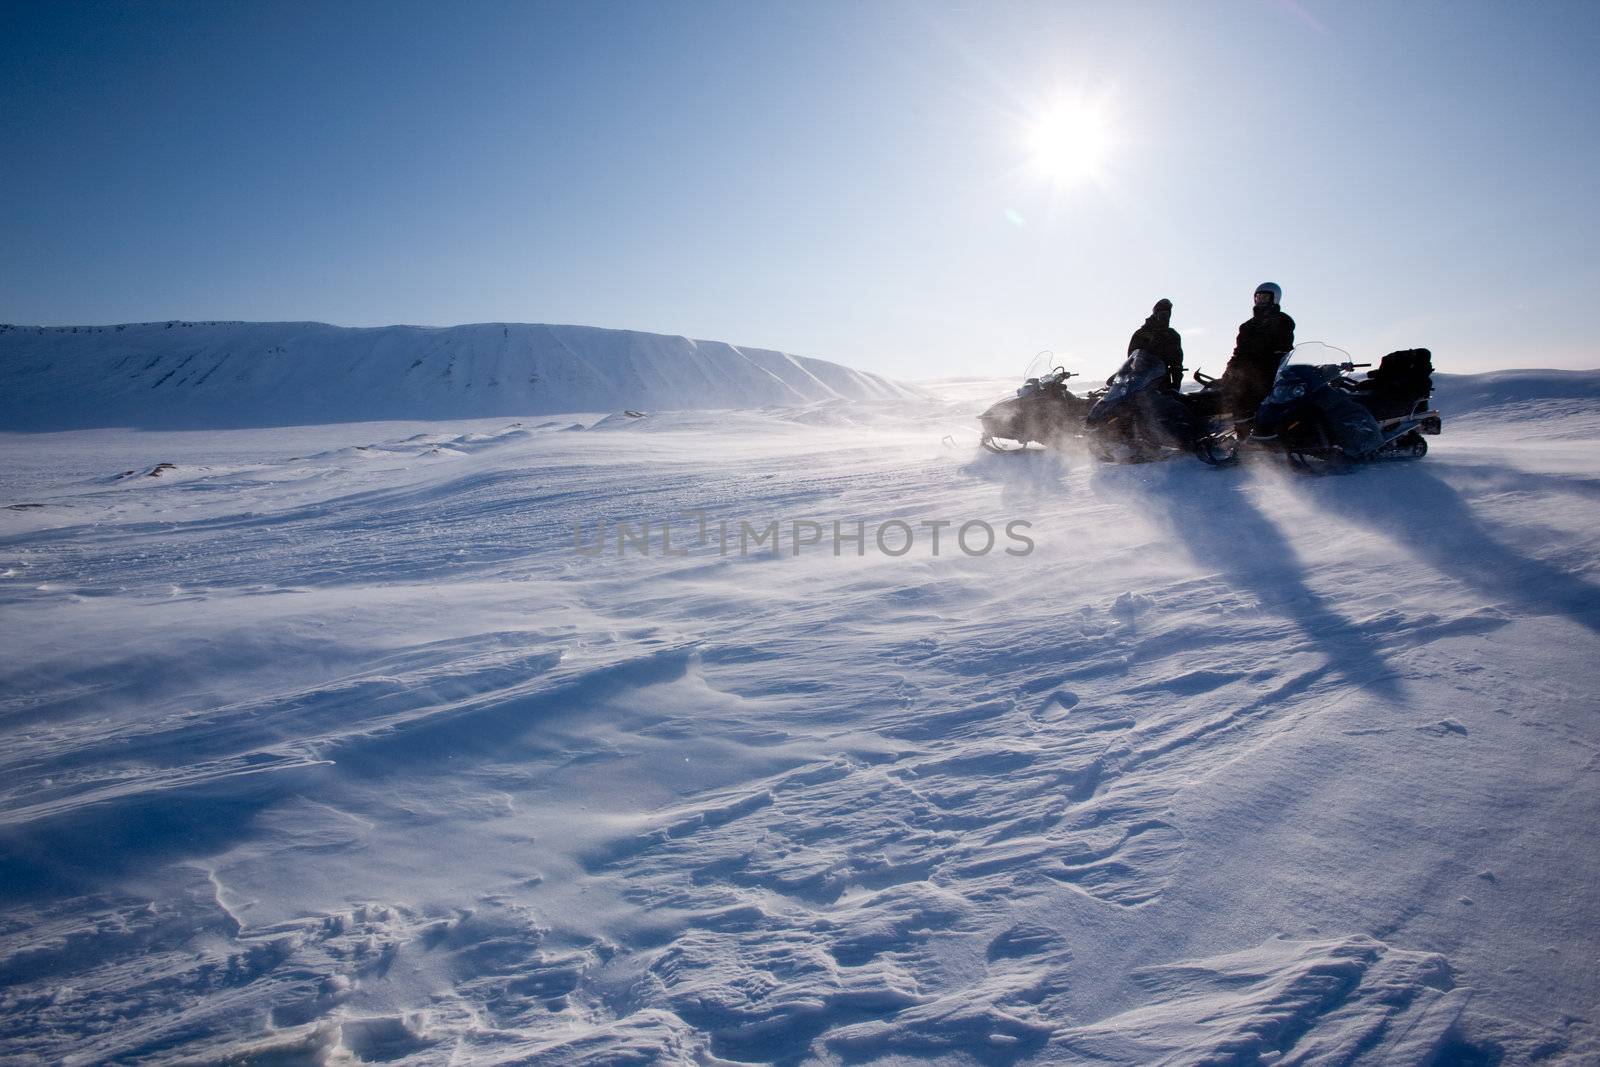 Travelling in a very cold winter landscape with blowing snow